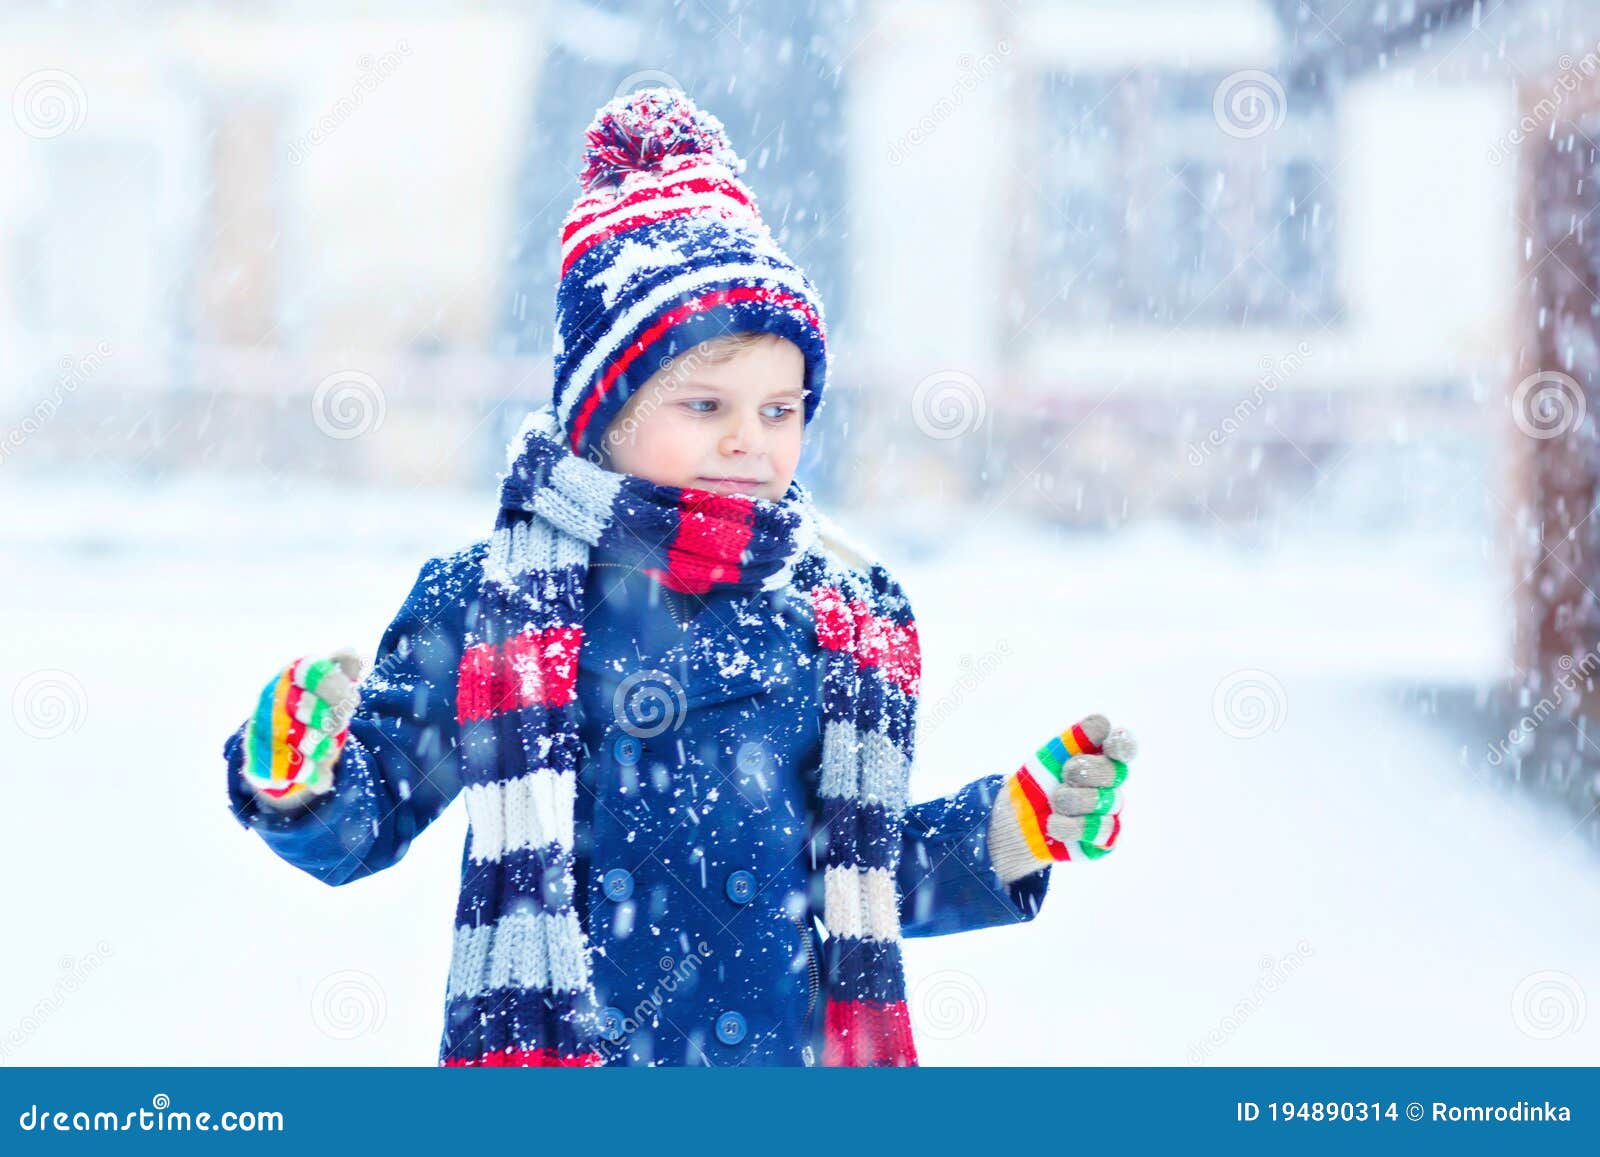 Cute Little Funny Child in Colorful Winter Fashion Clothes Having Fun and  Playing with Snow, Outdoors during Snowfall Stock Photo - Image of  adorable, clothing: 194890314